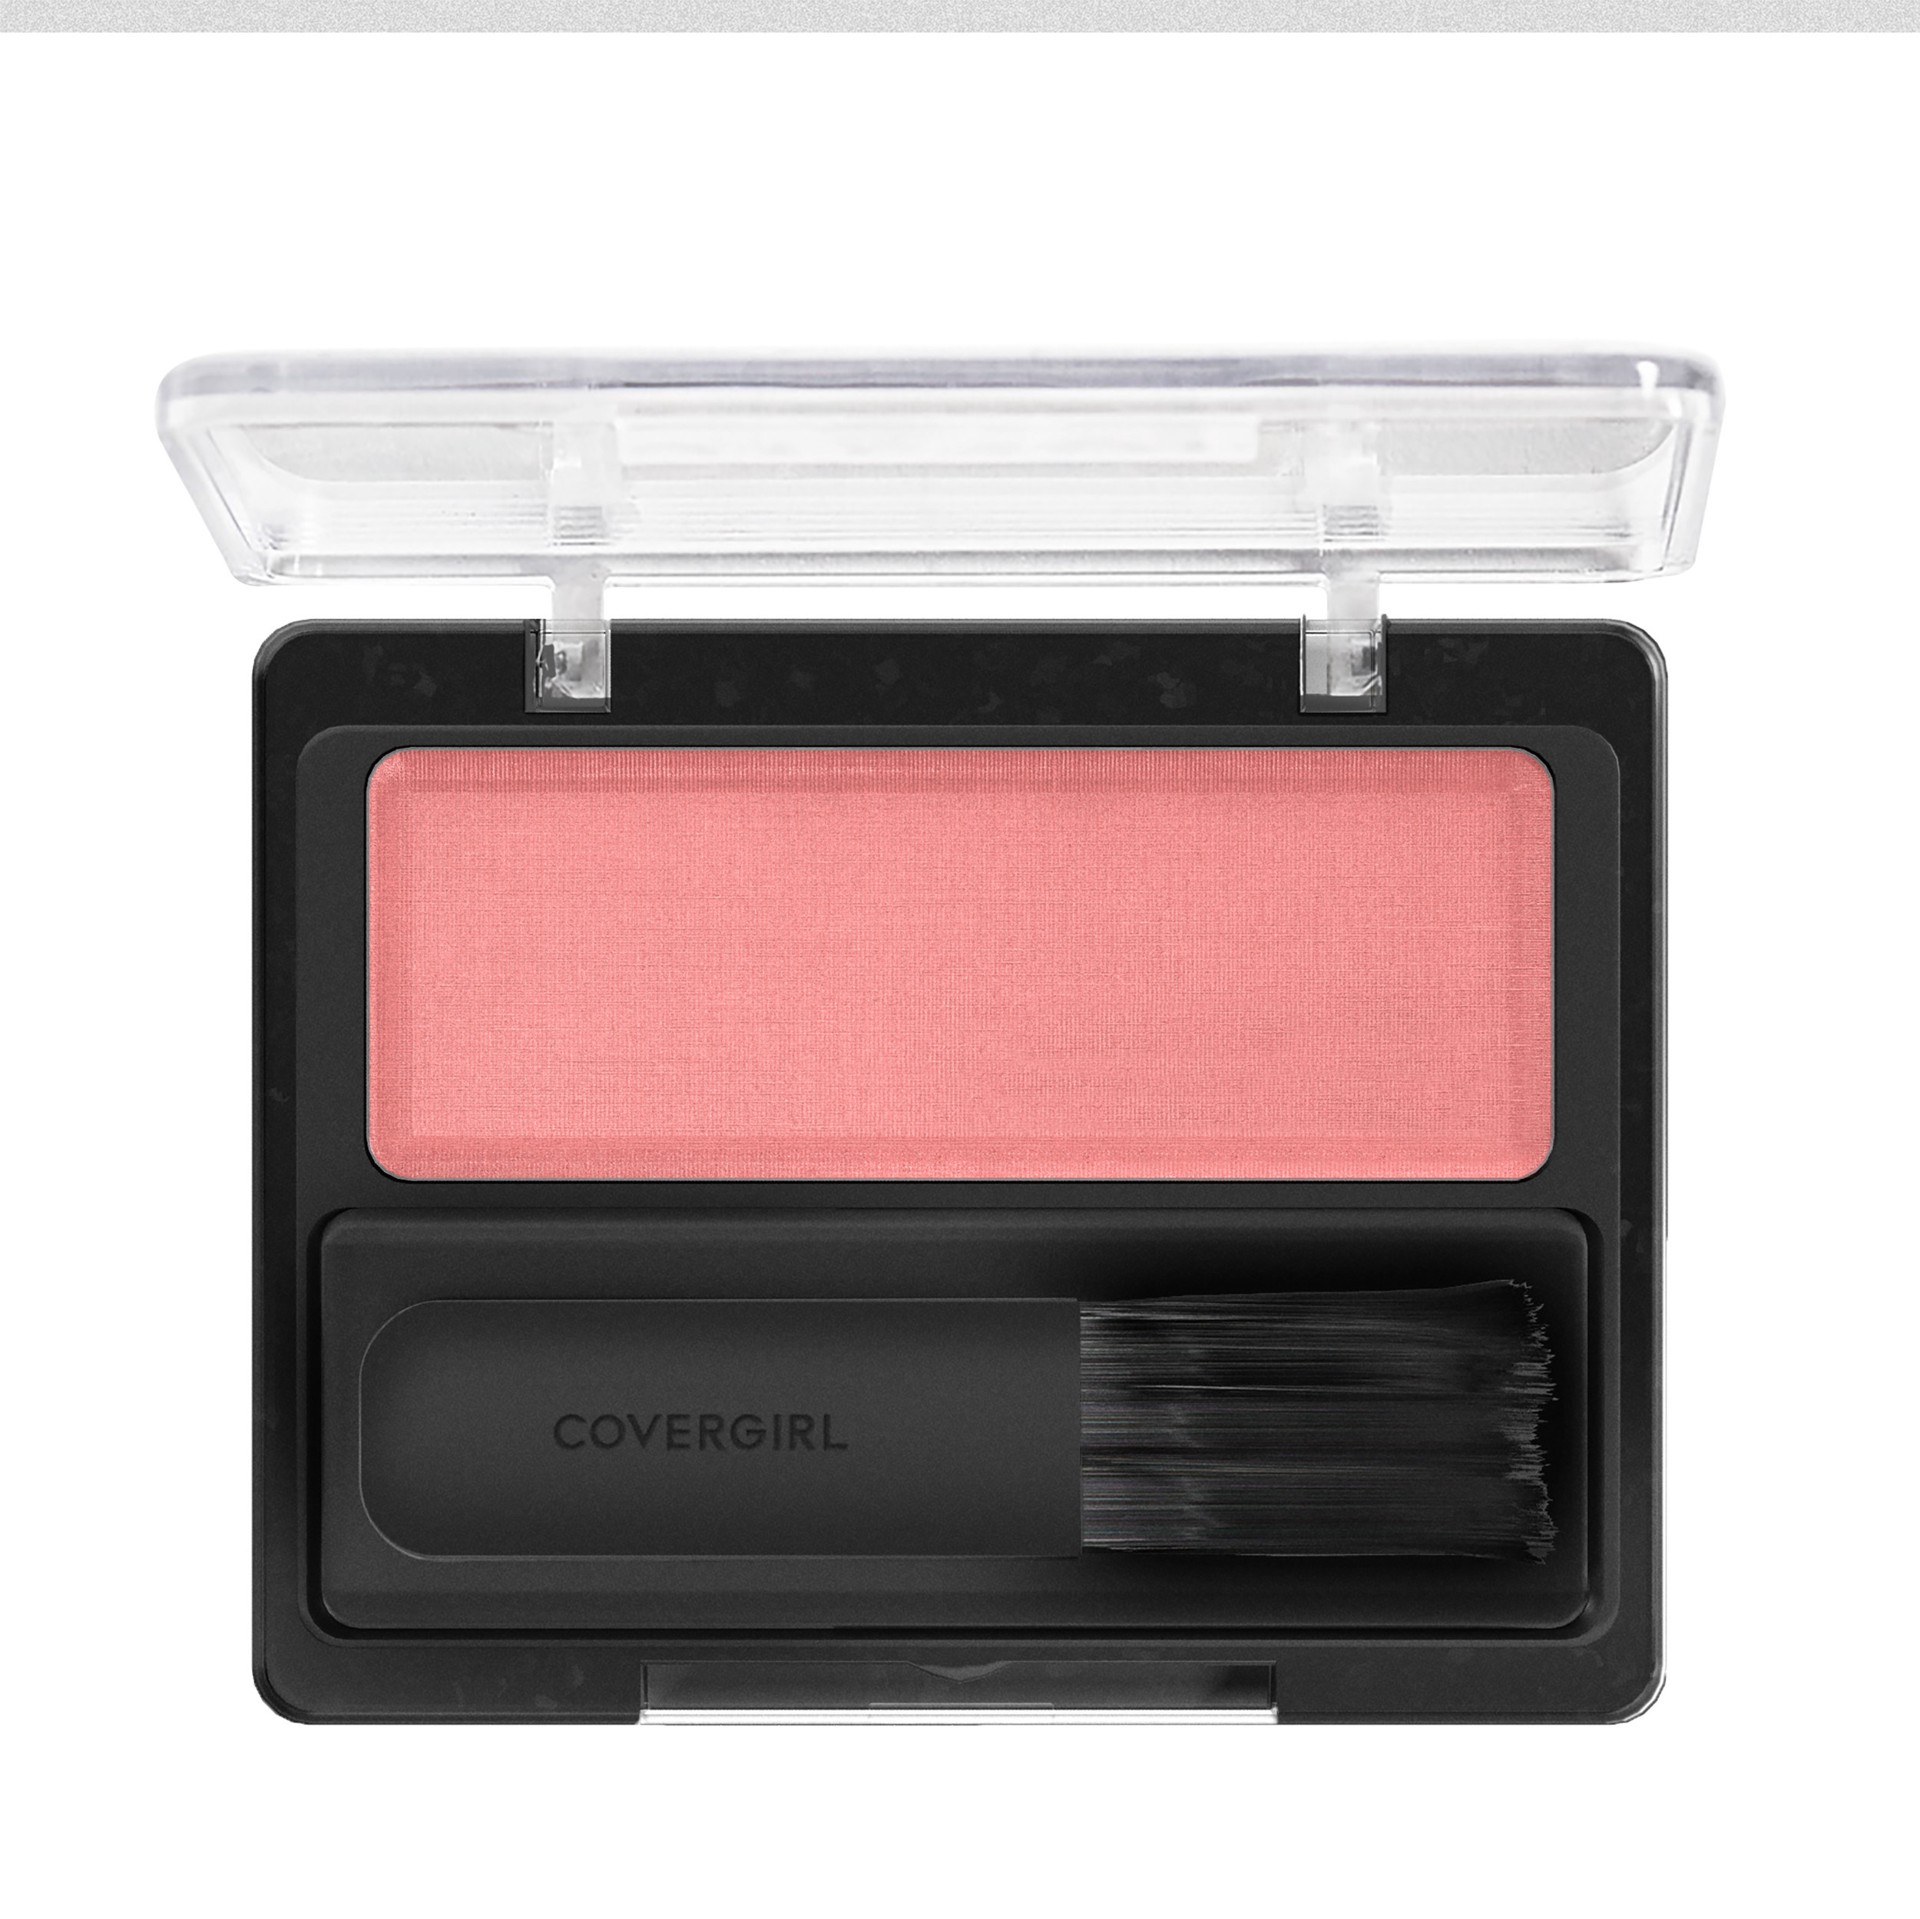 slide 1 of 42, COTY COVERGIRL COVERGIRL Classic Color Blush Rose Silk, 1 ct